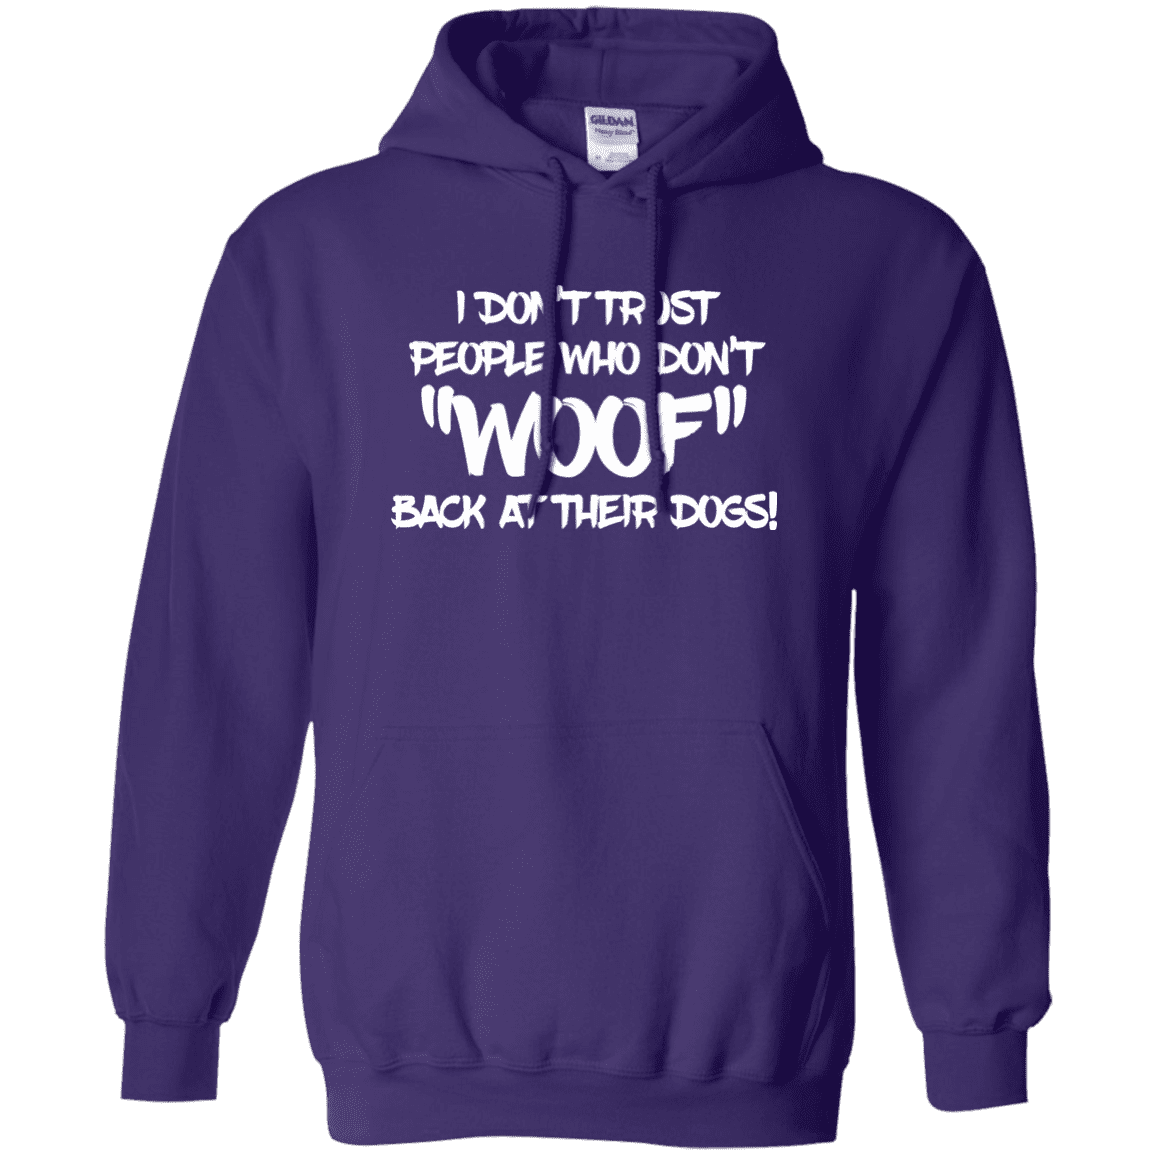 Don't Trust Don't Woof - Hoodie.